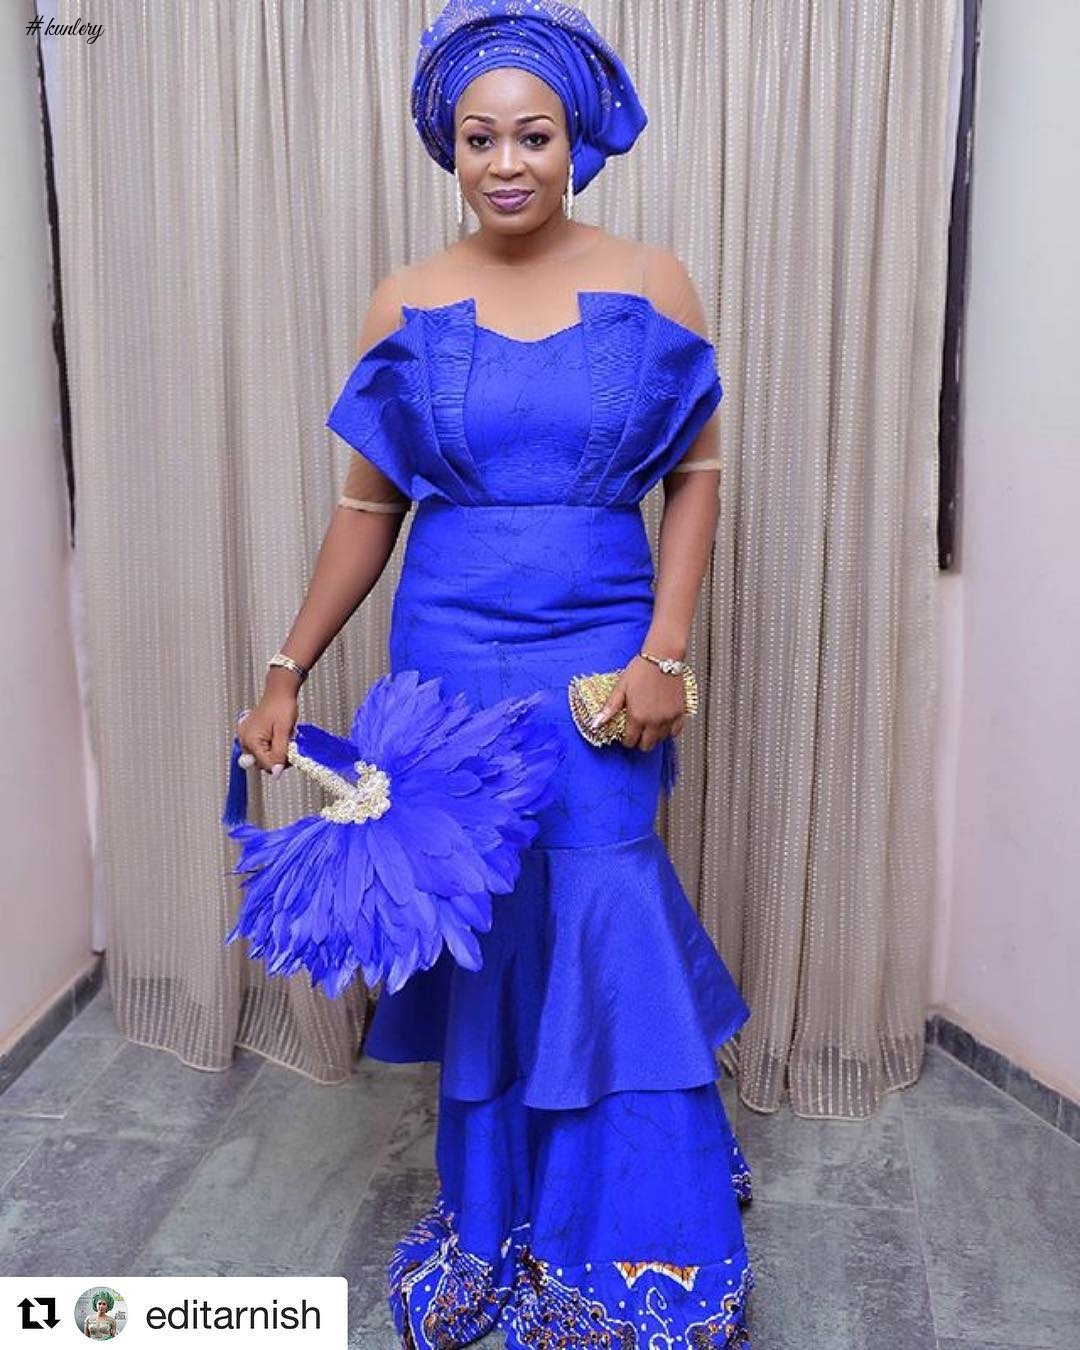 2018 STARTED WITH THE THE HOTTEST OF ASO EBI STYLES TRUST US